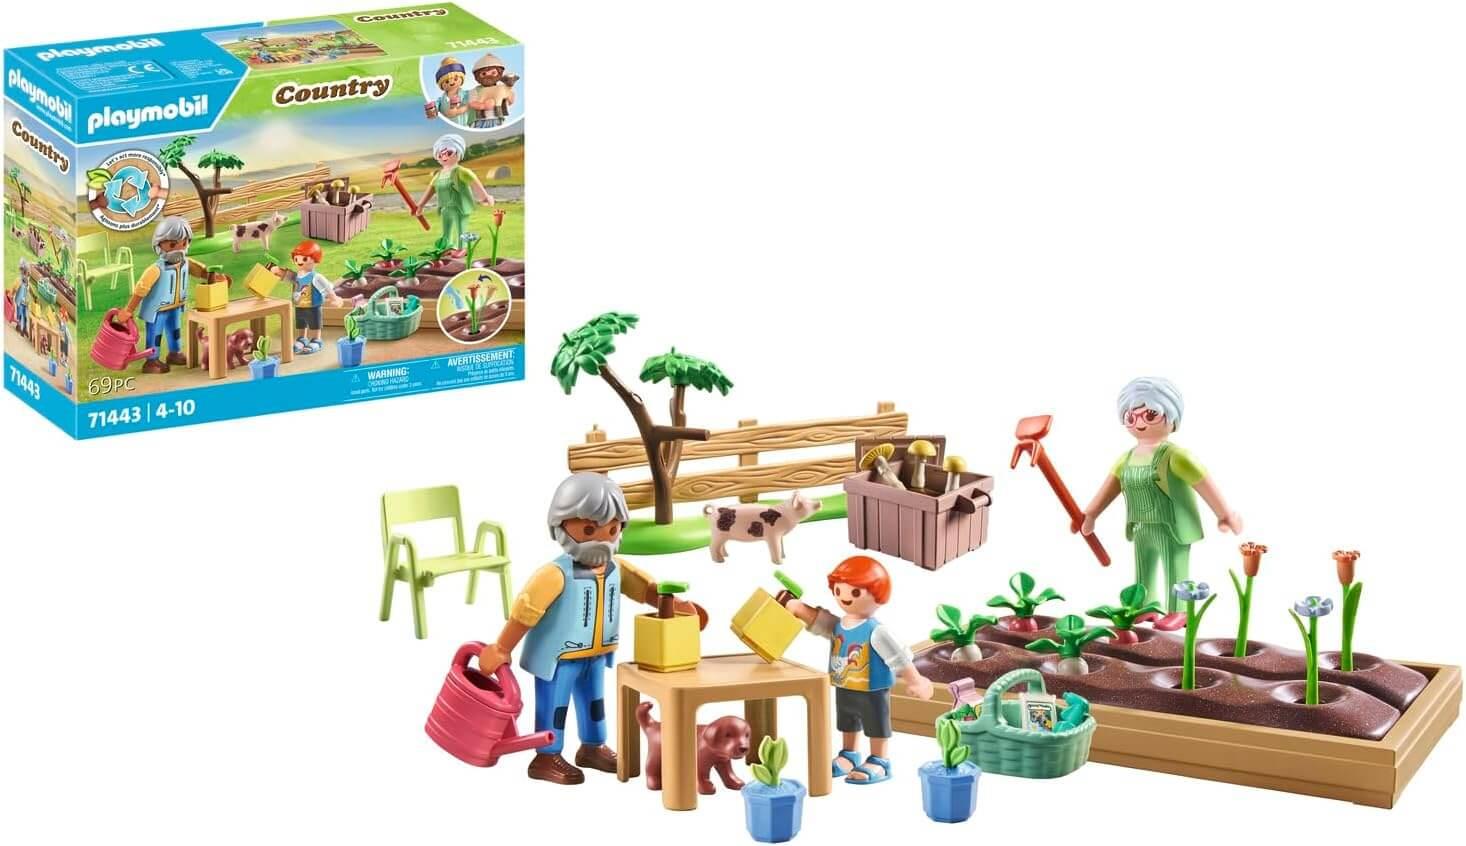 Playmobil Country 71443 Vegetable Garden with Grandparents